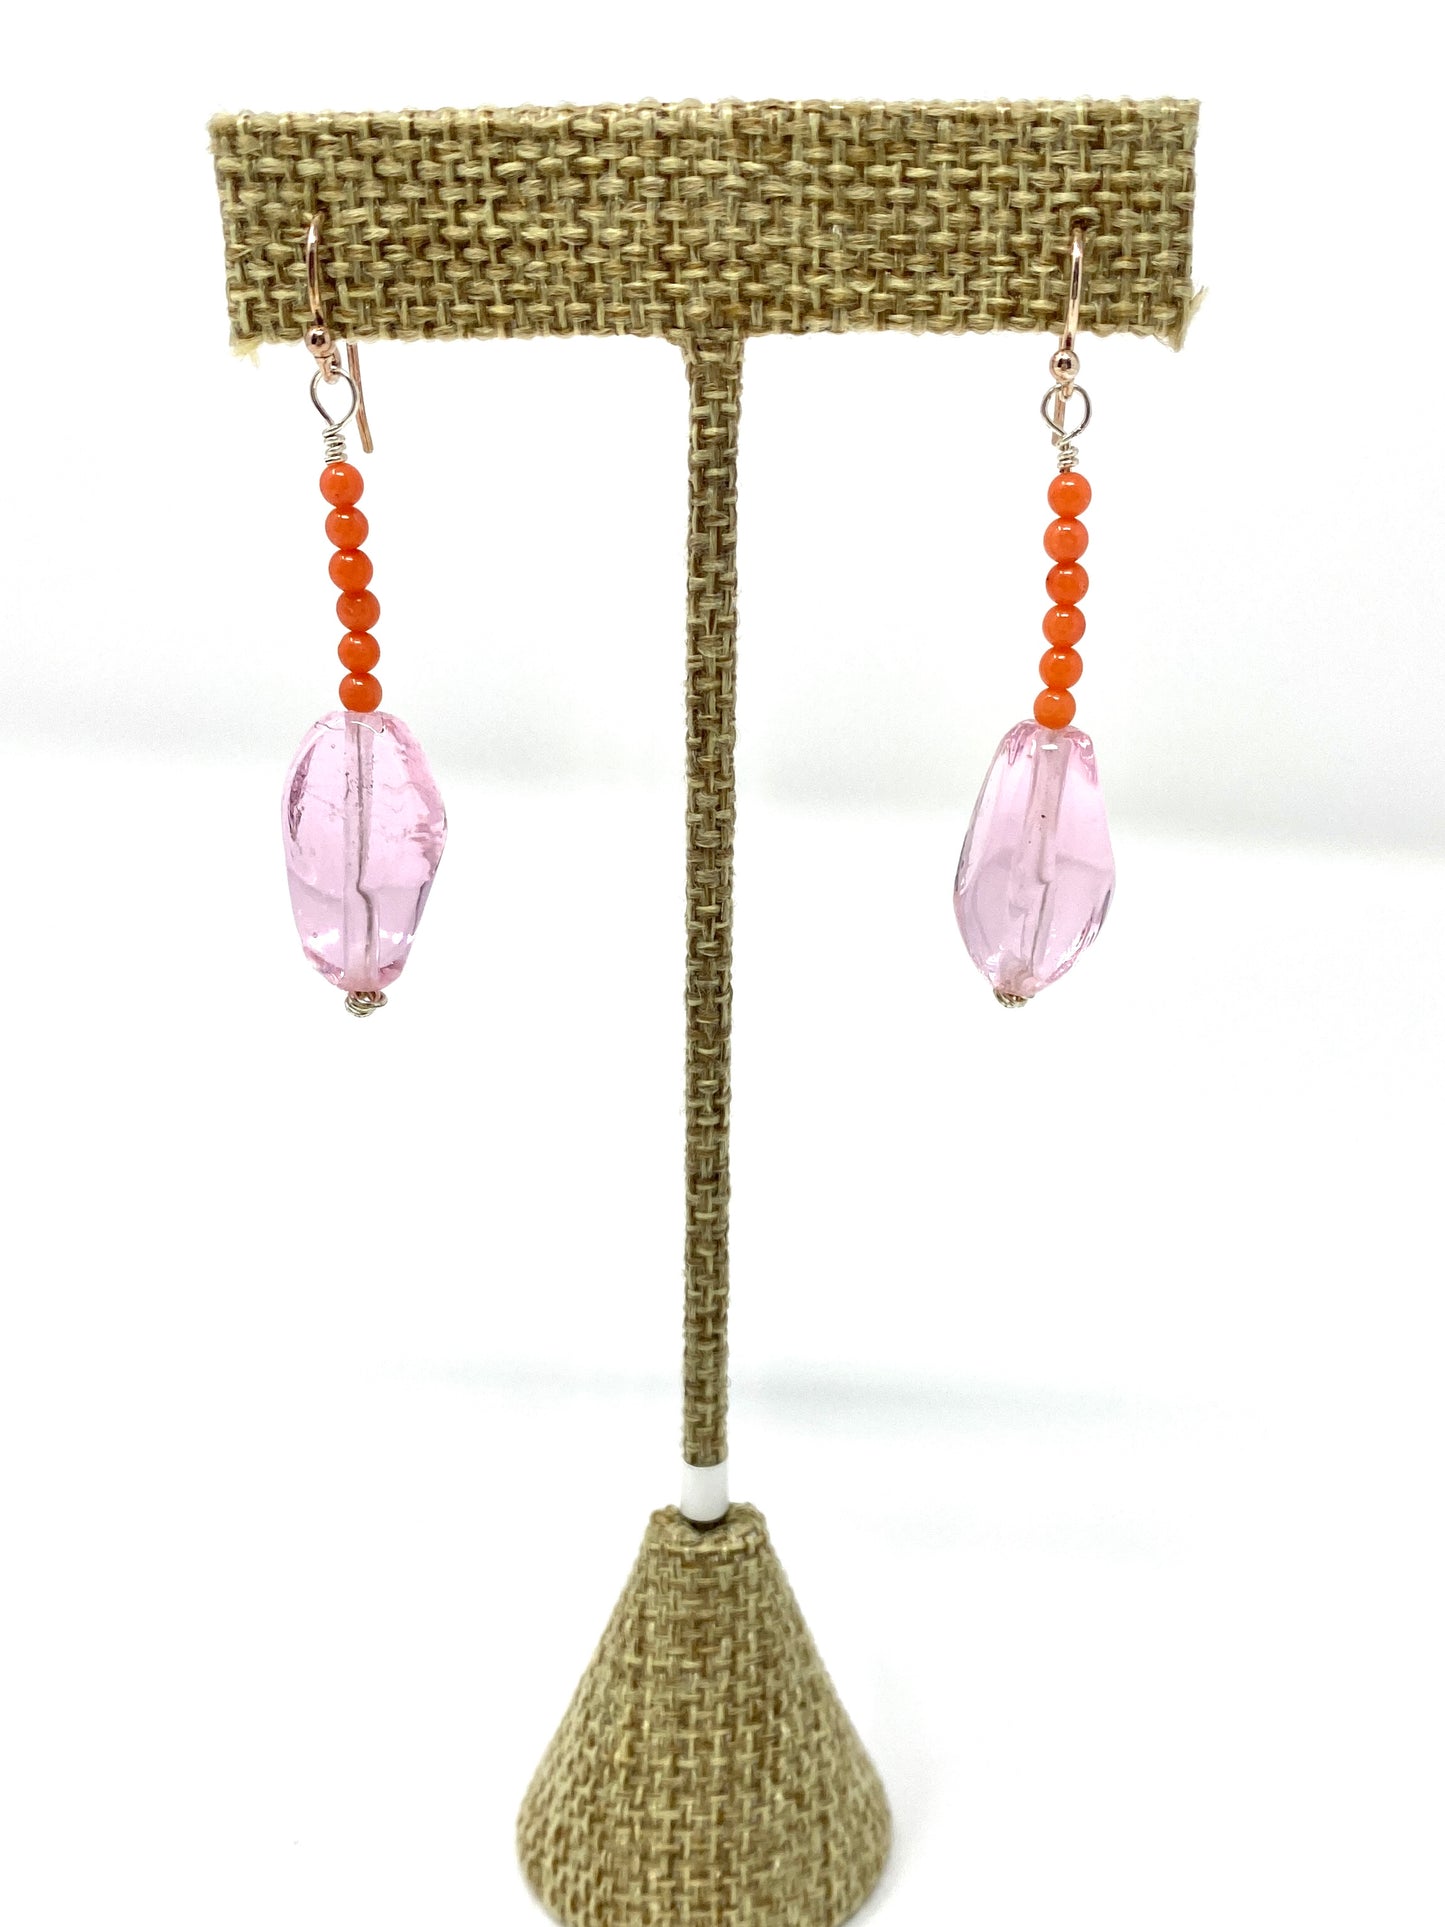 Sterling Silver Earrings With Orange Coral Beads and Light Pink Acrylic Stone